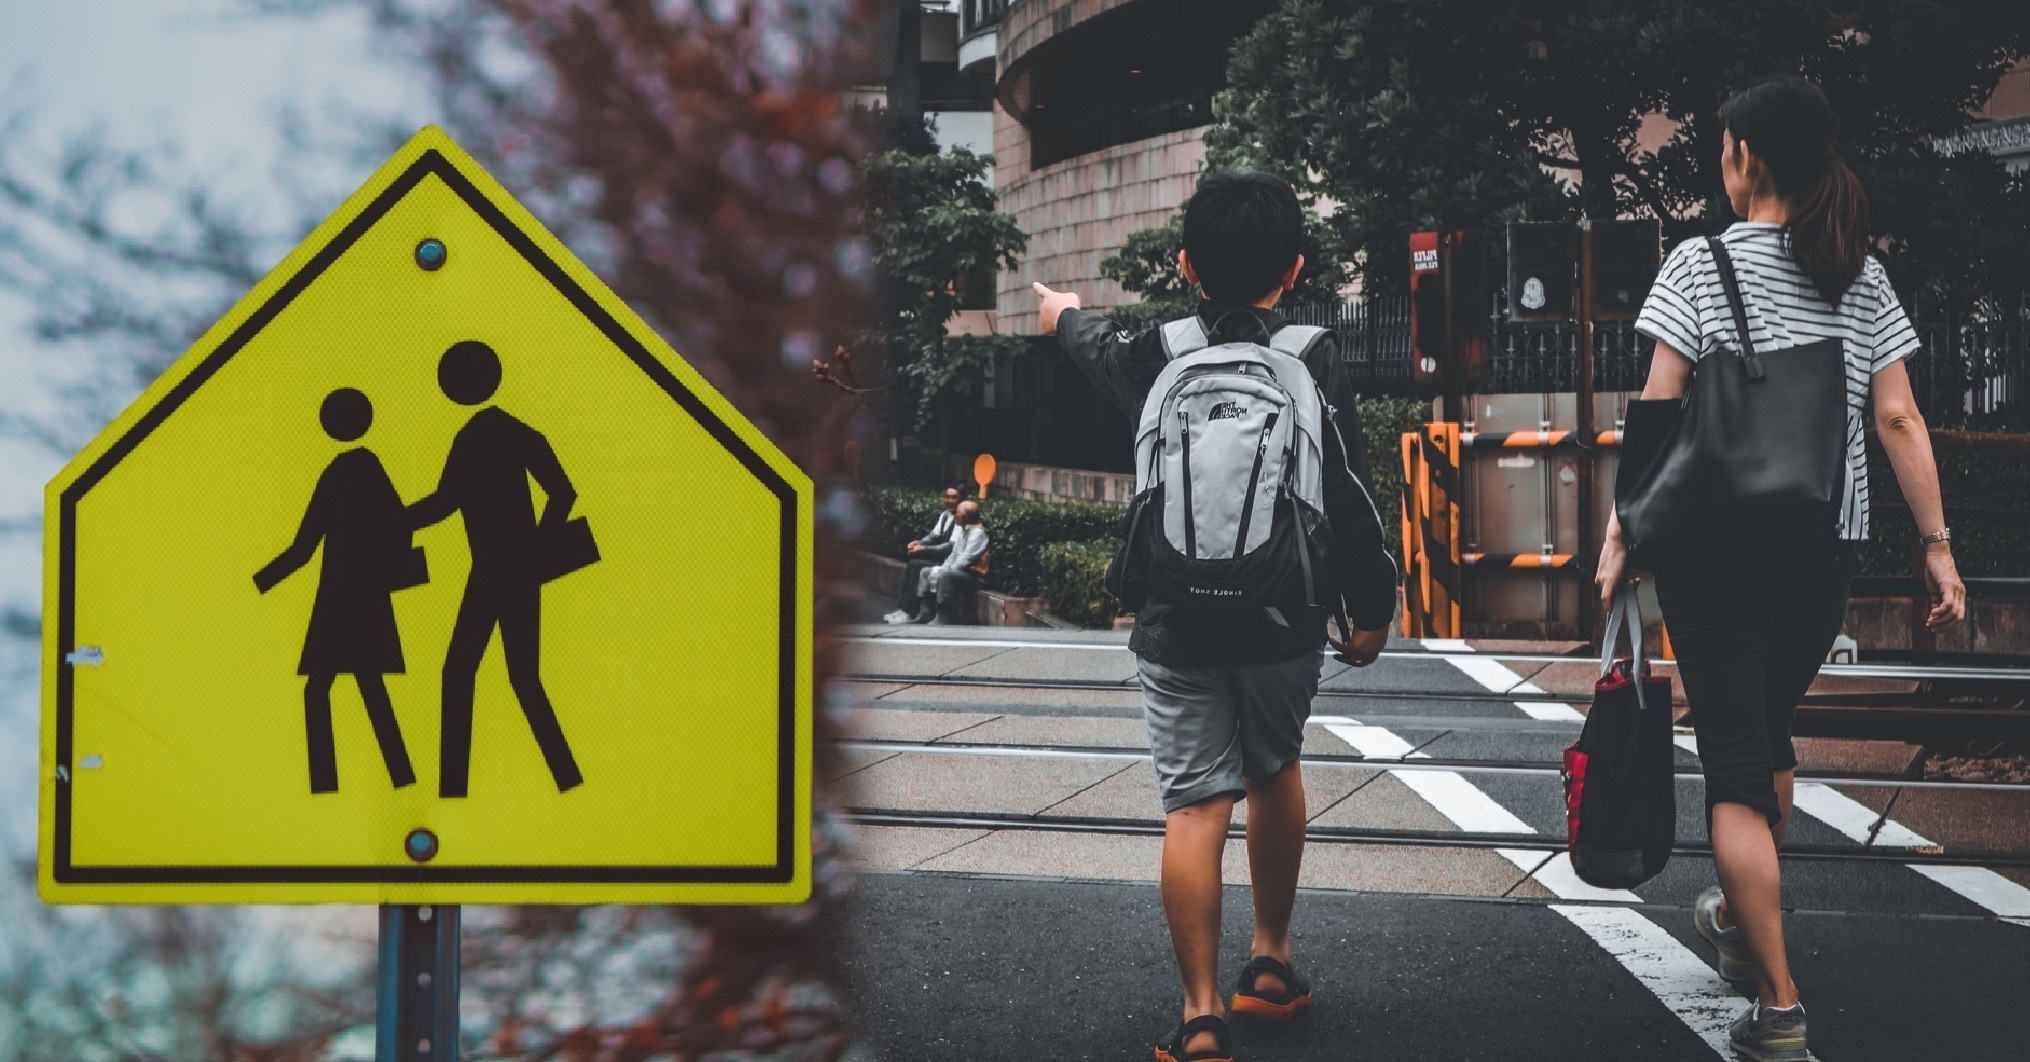 yellow school zone sign and kids crossing a crosswalk